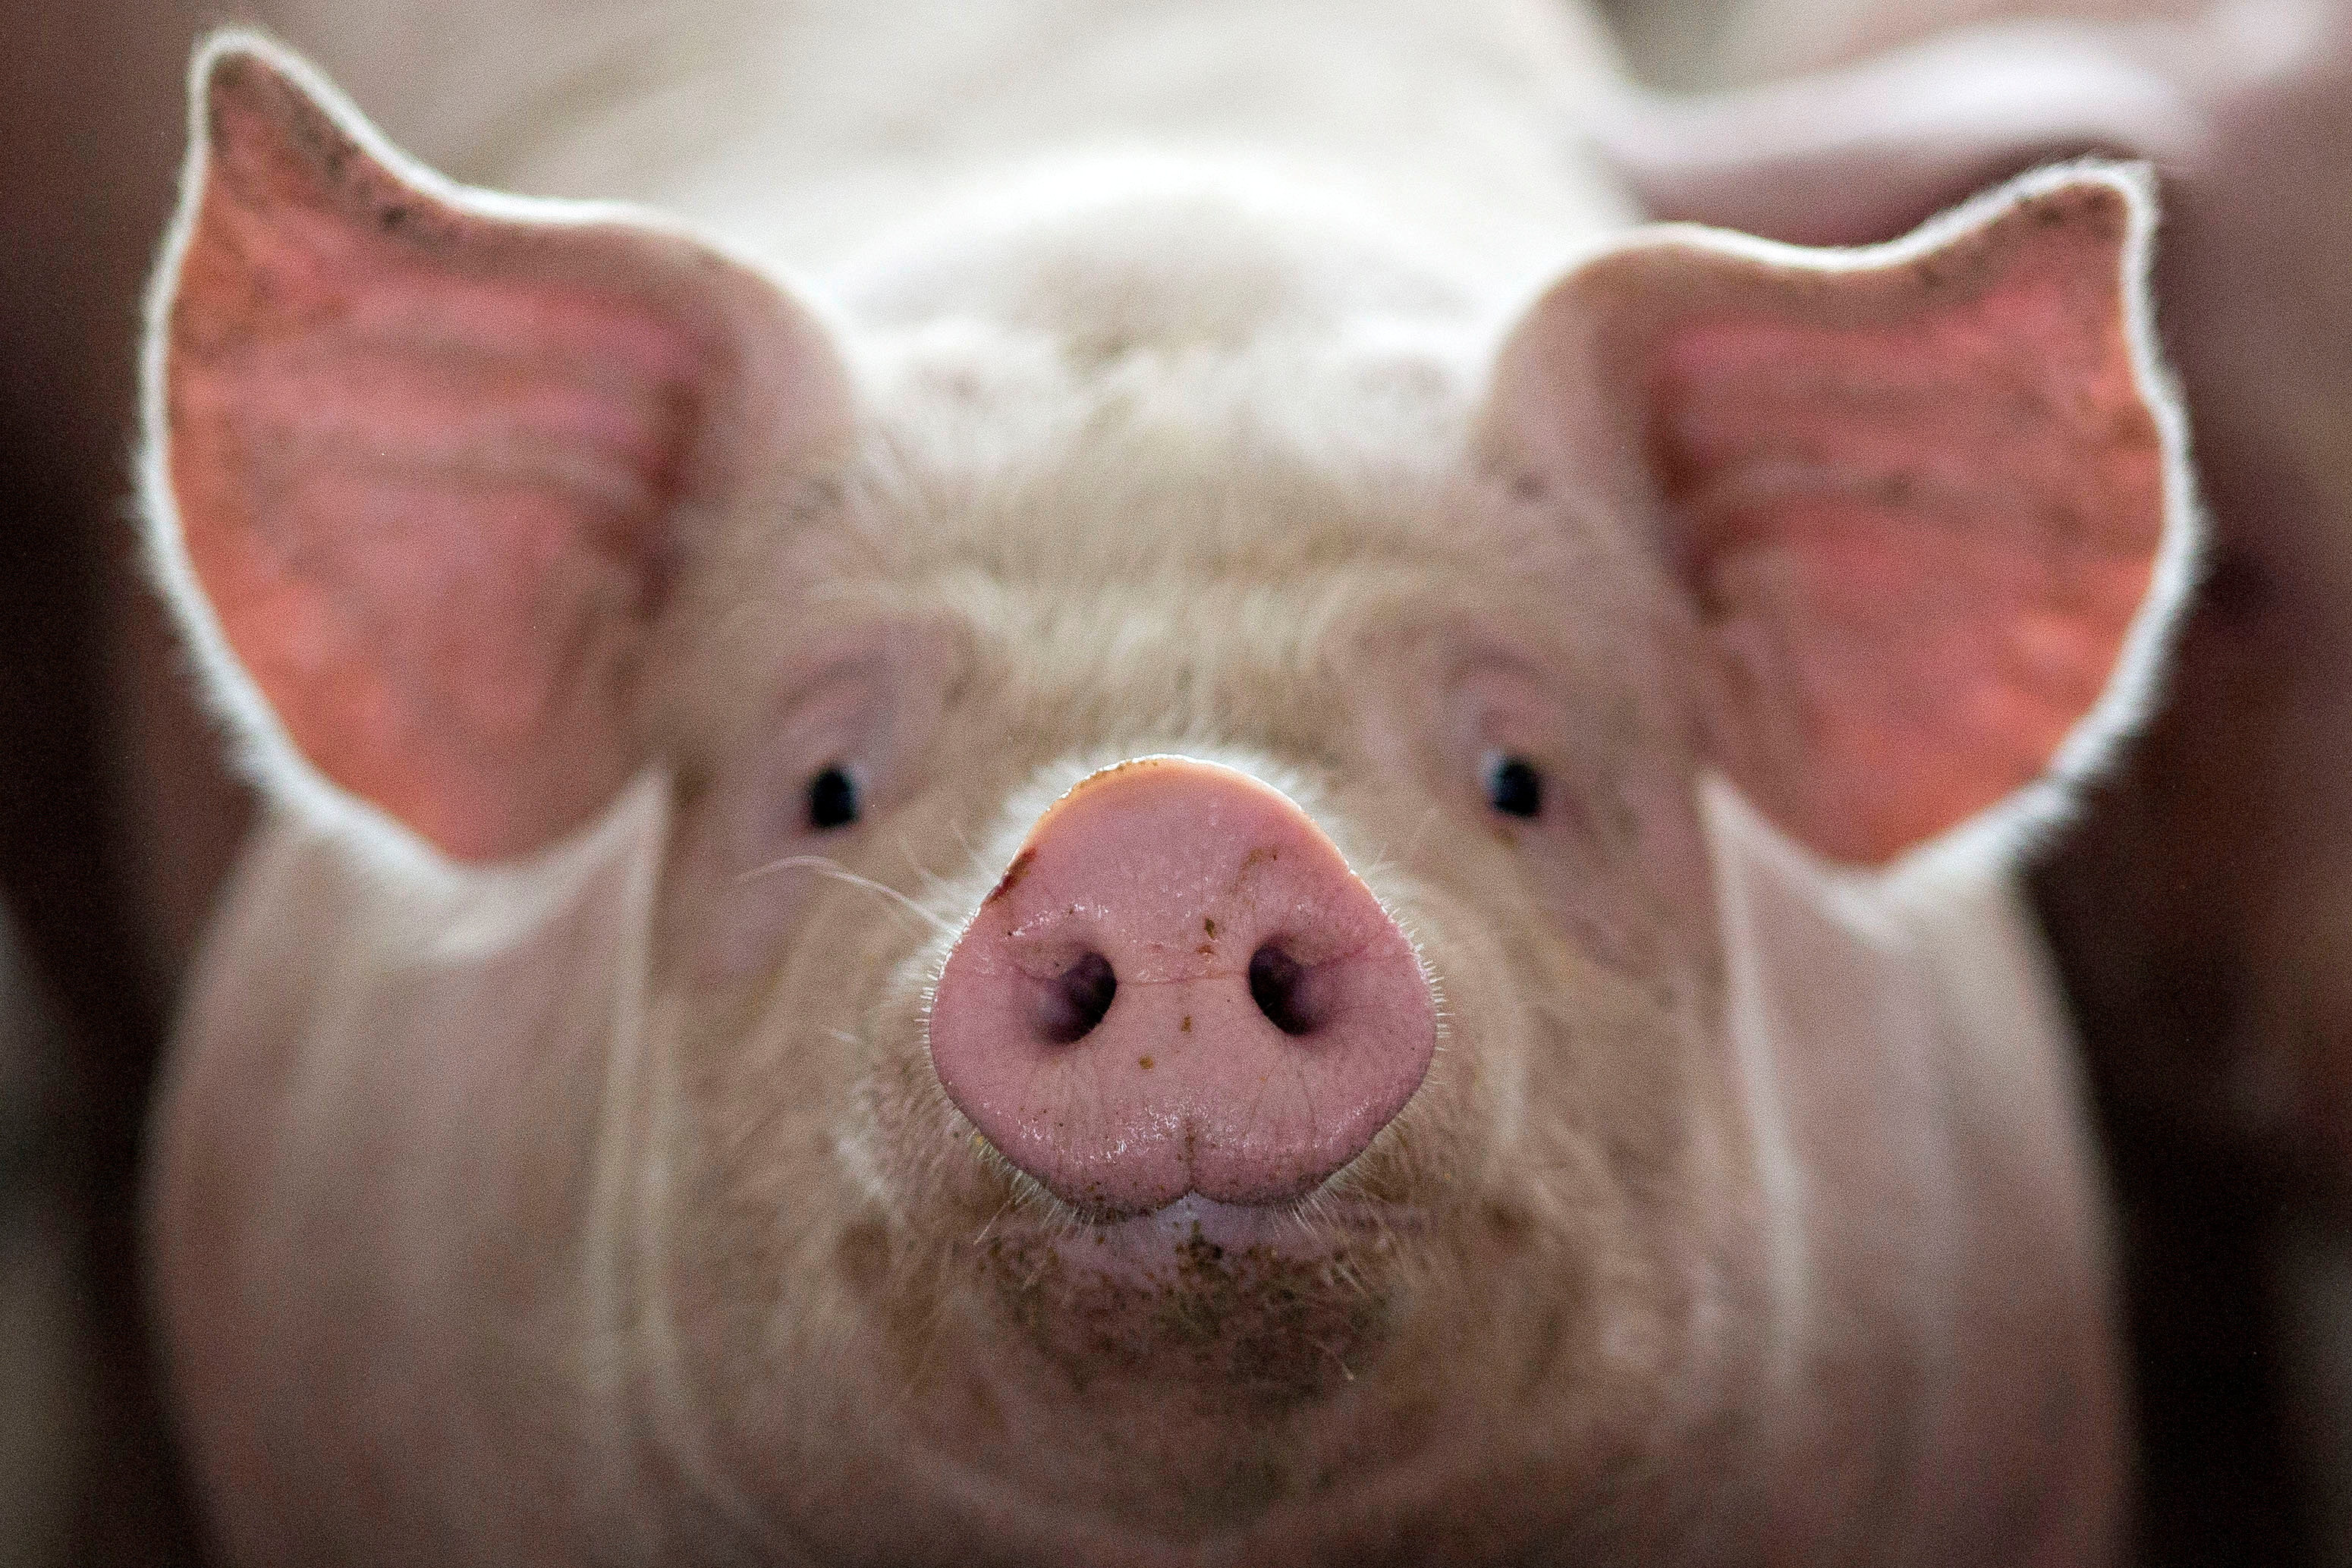 A flight from Paris to New York powered solely by waste biofuels such as animal fats requires some 8,800 dead pigs, according to sustainable transport advocacy group Transport & Environment. Photo: Reuters